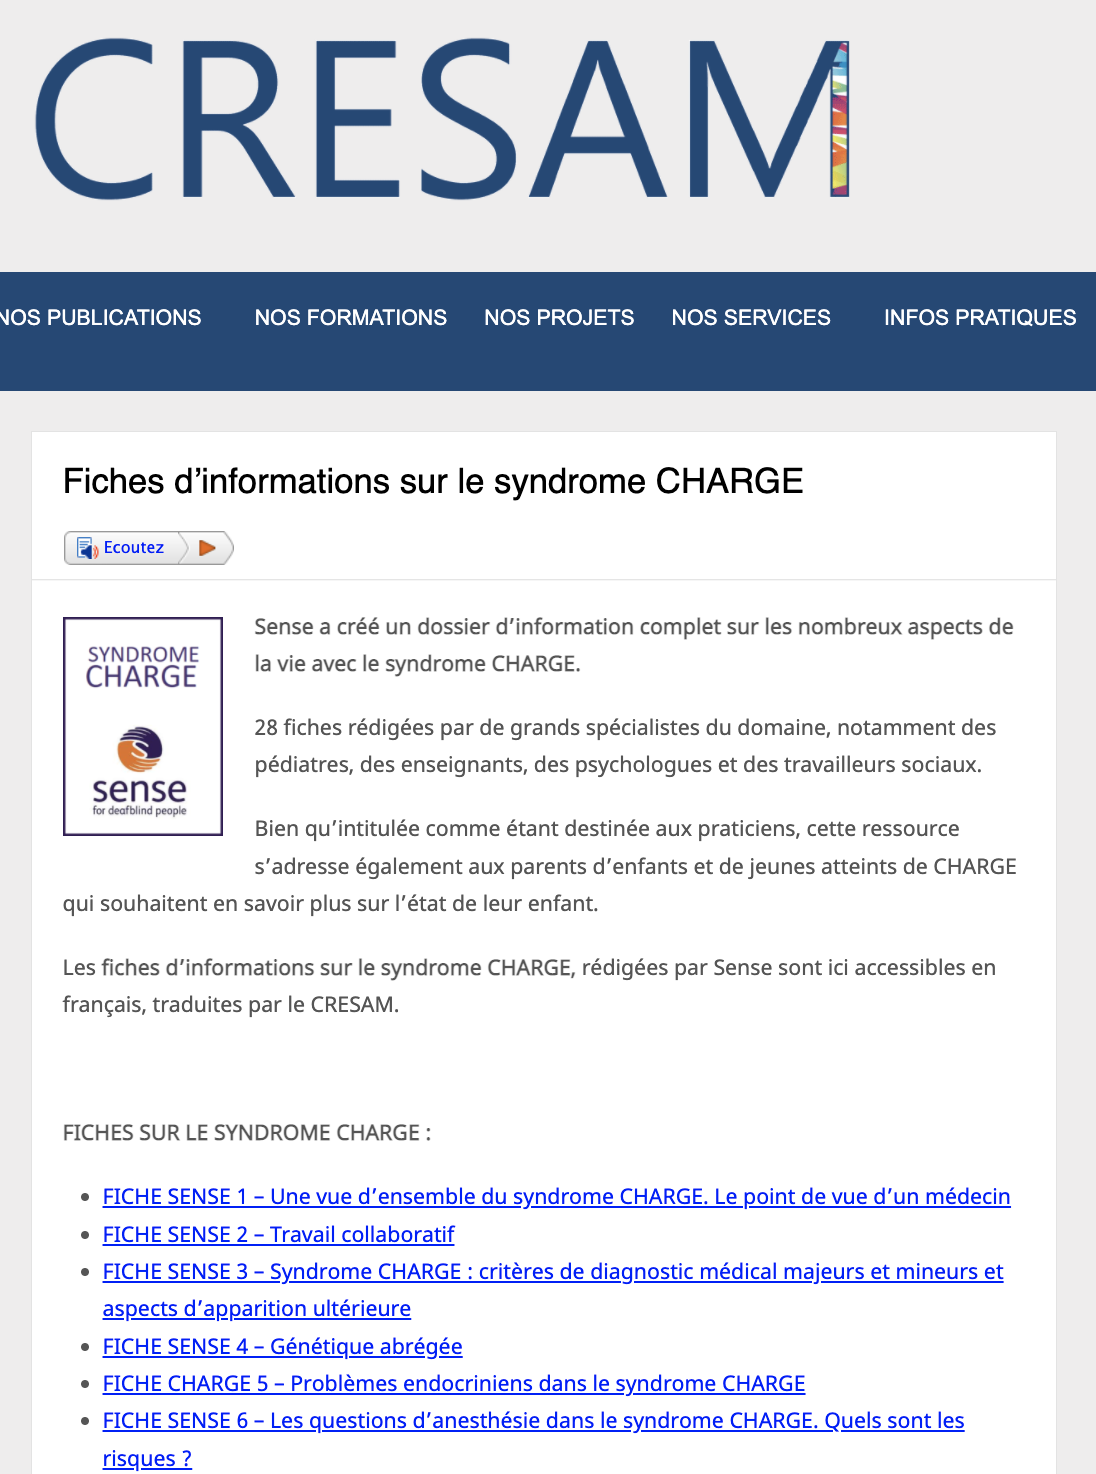 Image Site CRESAM Fiches Info Syndrome CHARGE